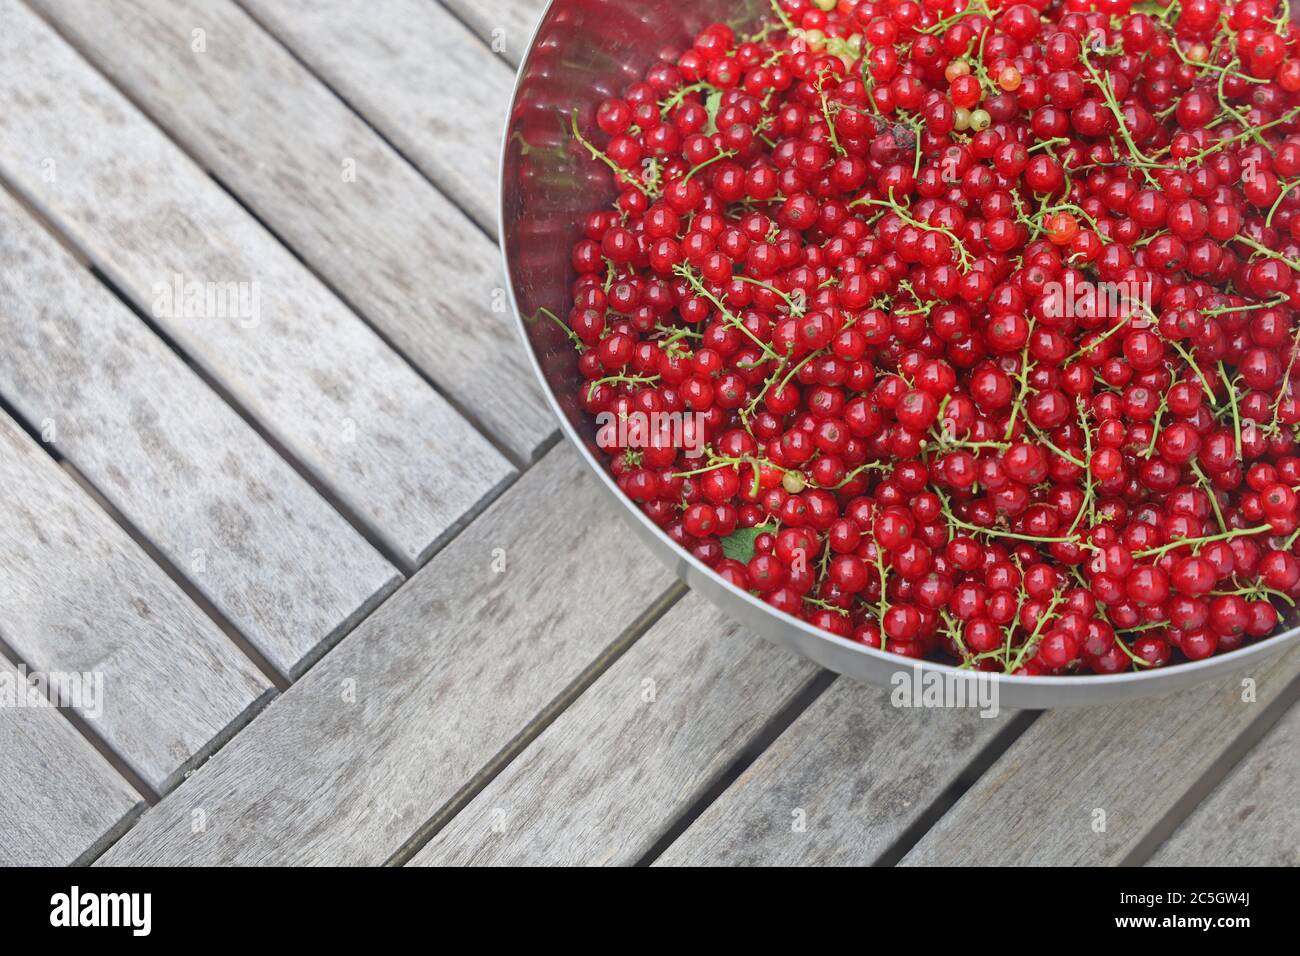 bowl of fresh harvested red currant berries on wooden table with copy space Stock Photo